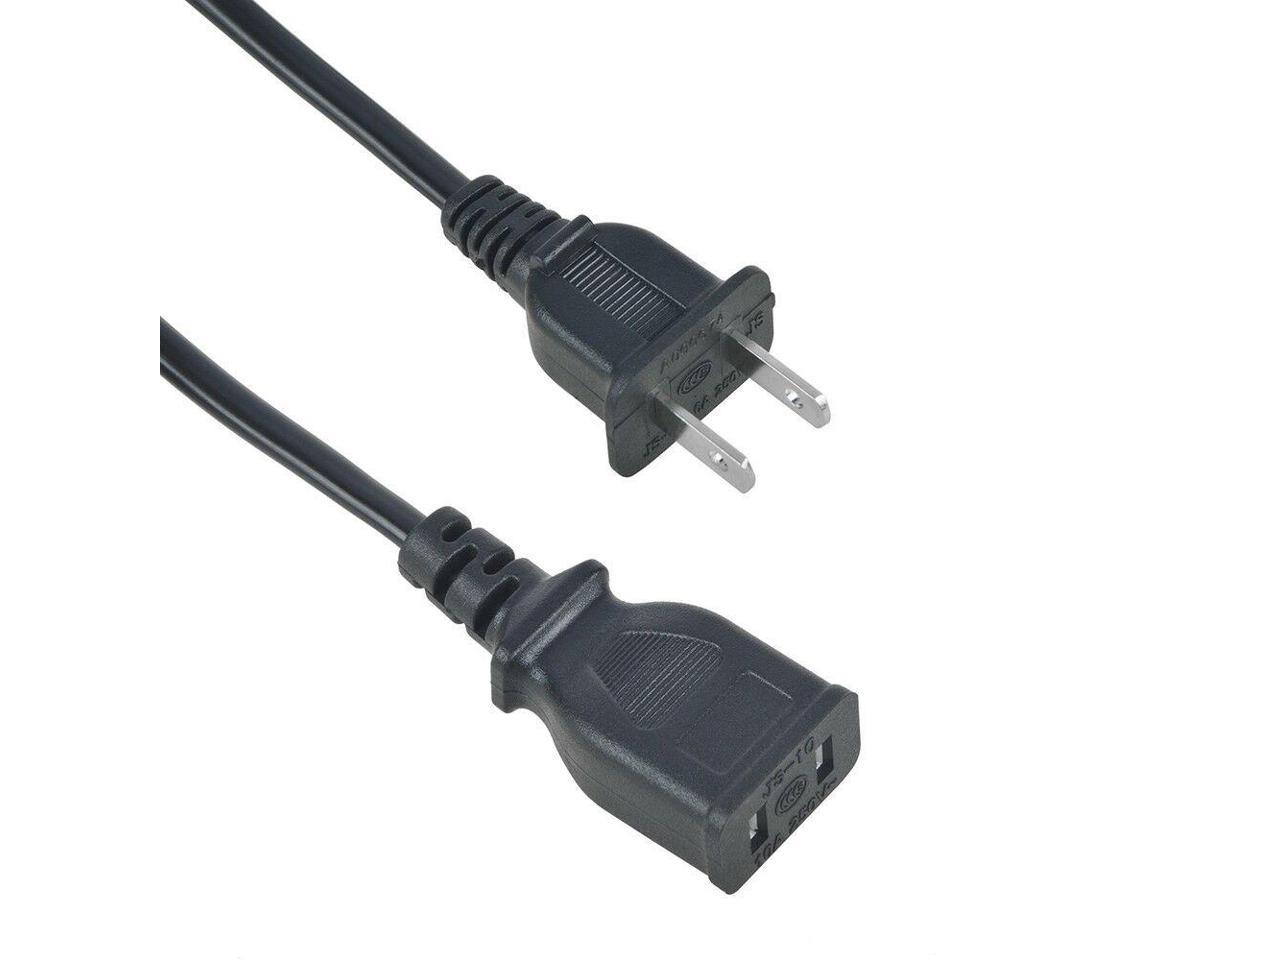 AC Power Extension Cord Cable Lead for EverStart Lot 11480 1200A 600A Saver 